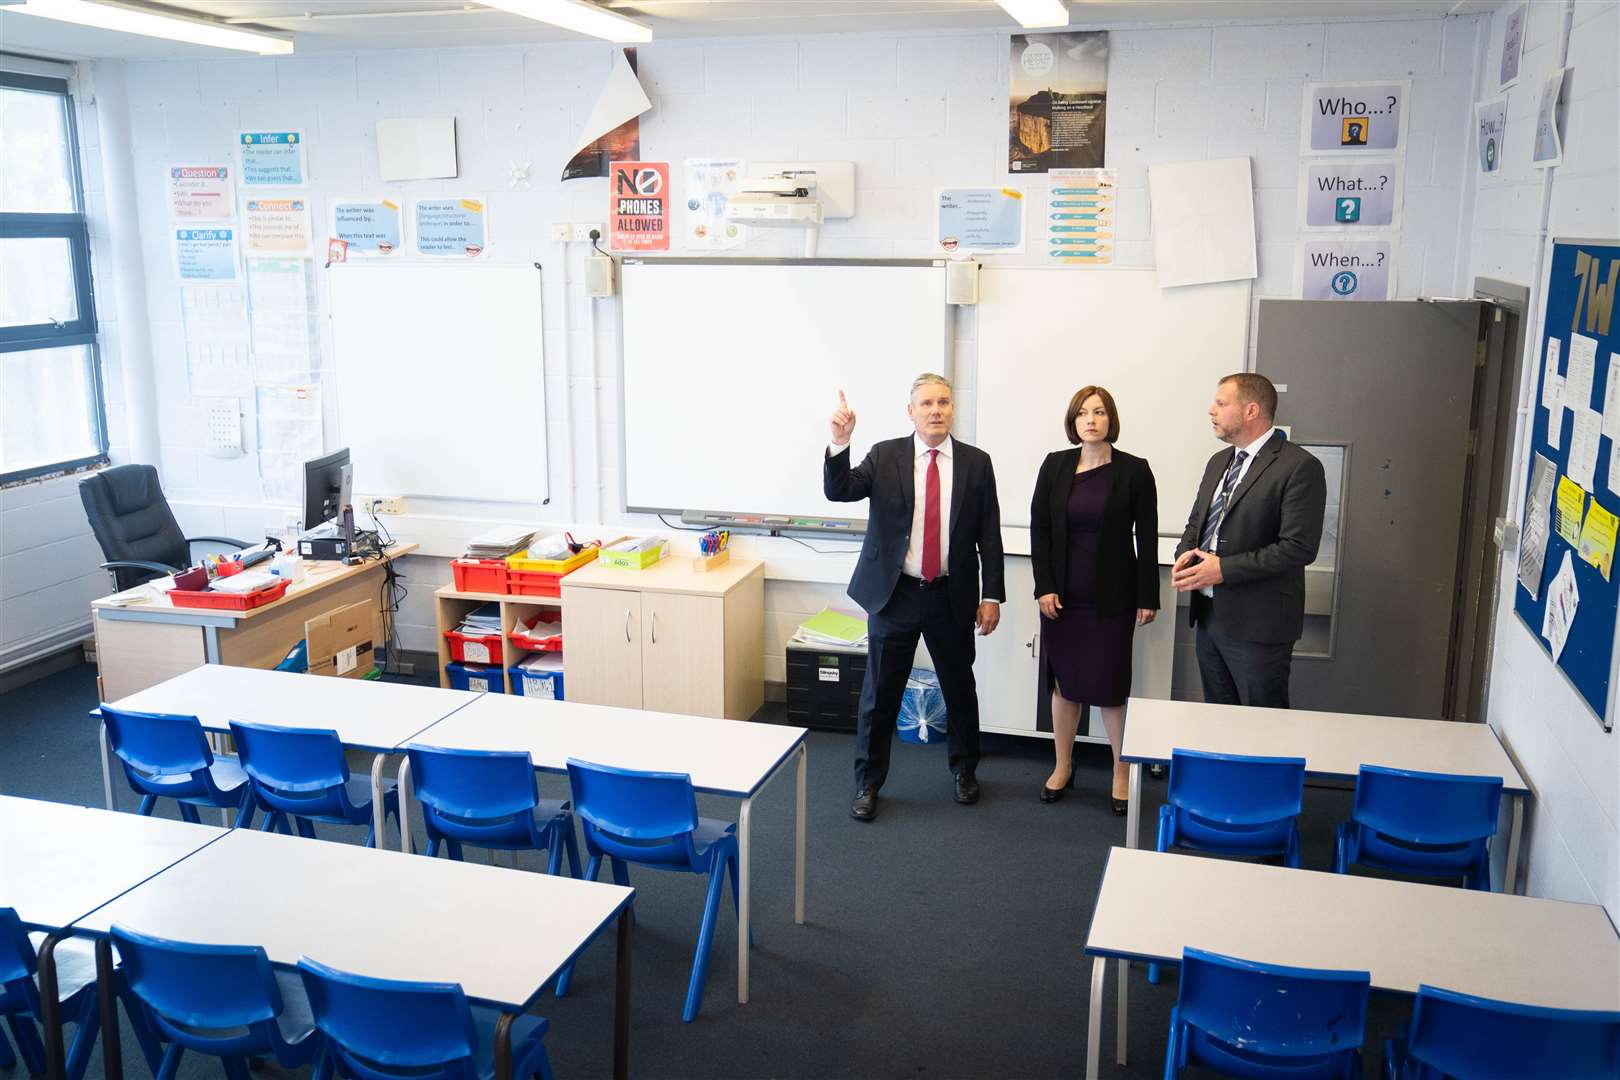 Labour leader Sir Keir Starmer, Shadow Education Secretary Bridget Phillipson, and Headteacher Andy Webster observe a classroom during a visit to Park View School in London, which has been significantly affected by the Raac crisis (James Manning/PA)